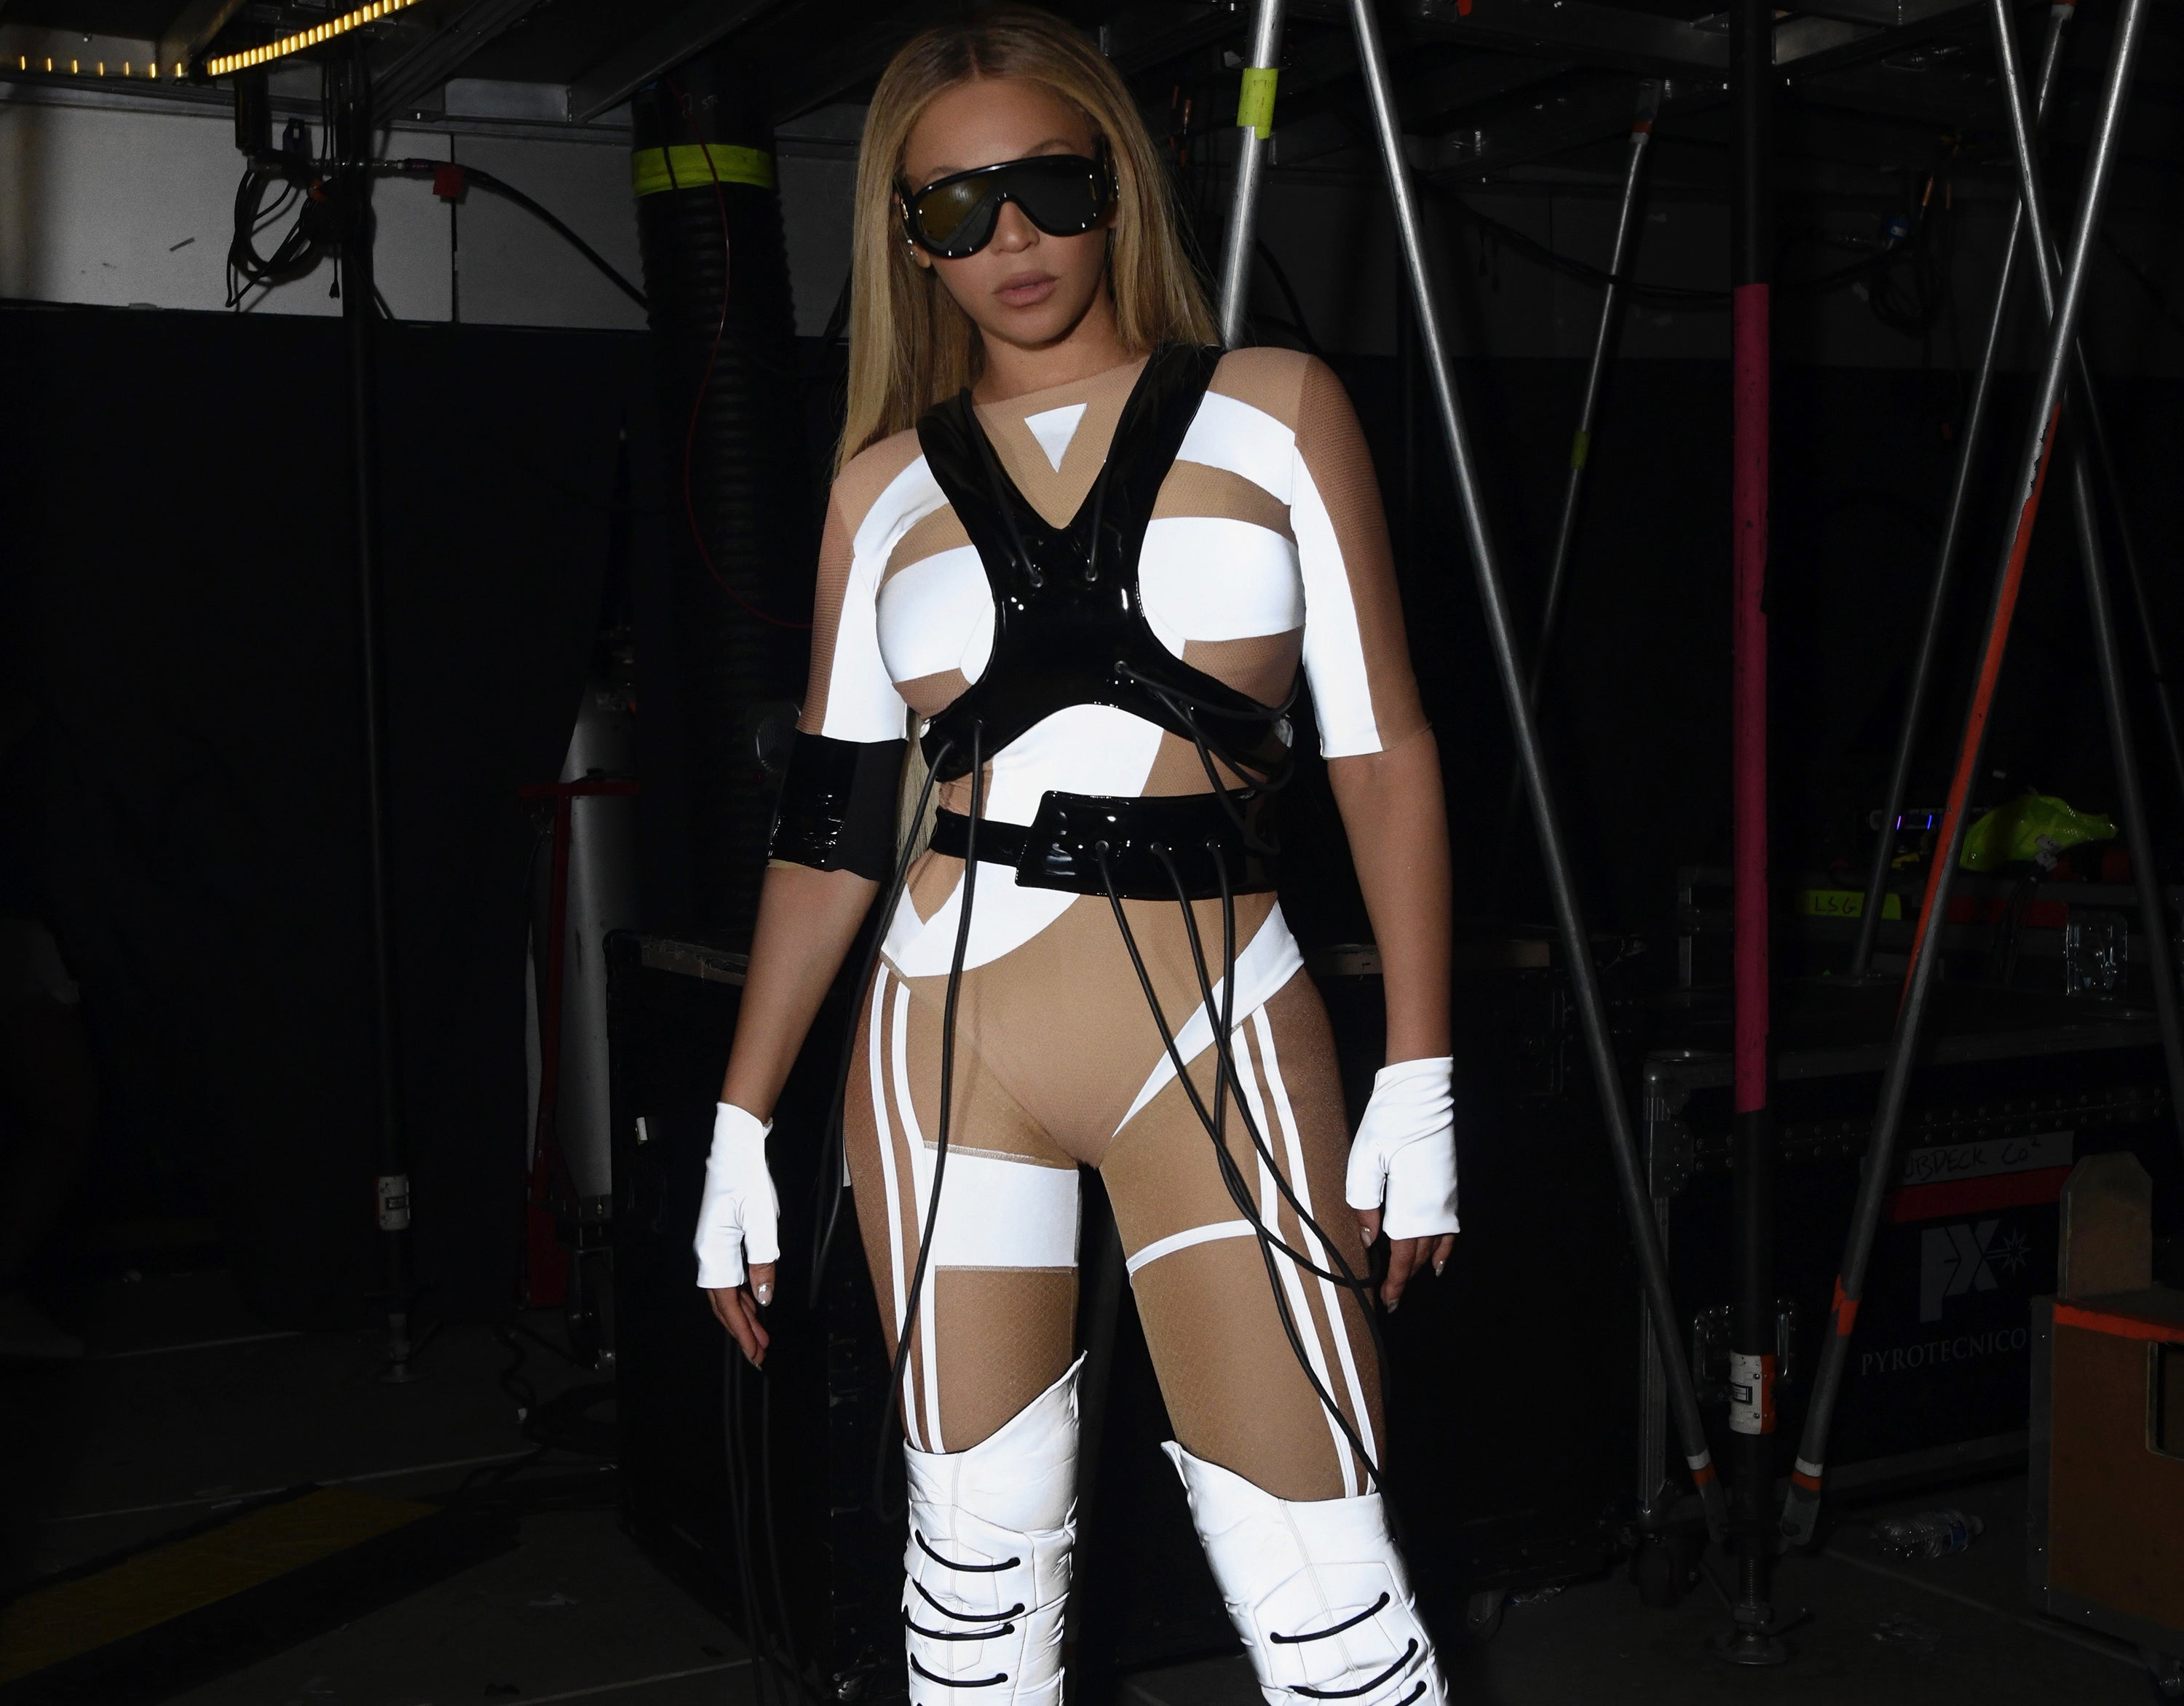 Beyonce Stuns New York Audience in Custom DEMOBAZA look: A Fusion of Fashion and Futurism